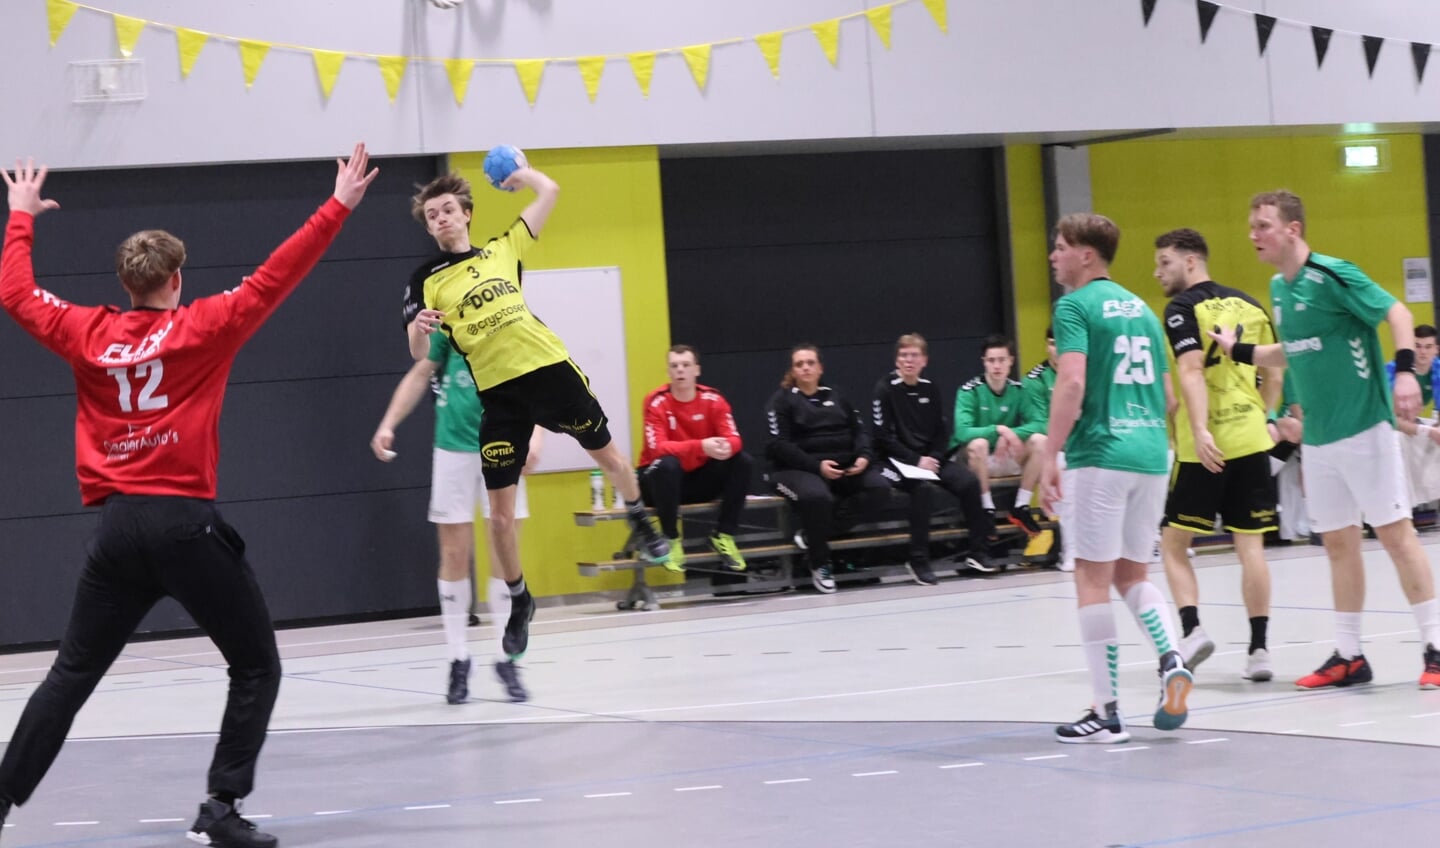 The Dome/Handbal Houten - oosting E&O/Hurry Up HS1